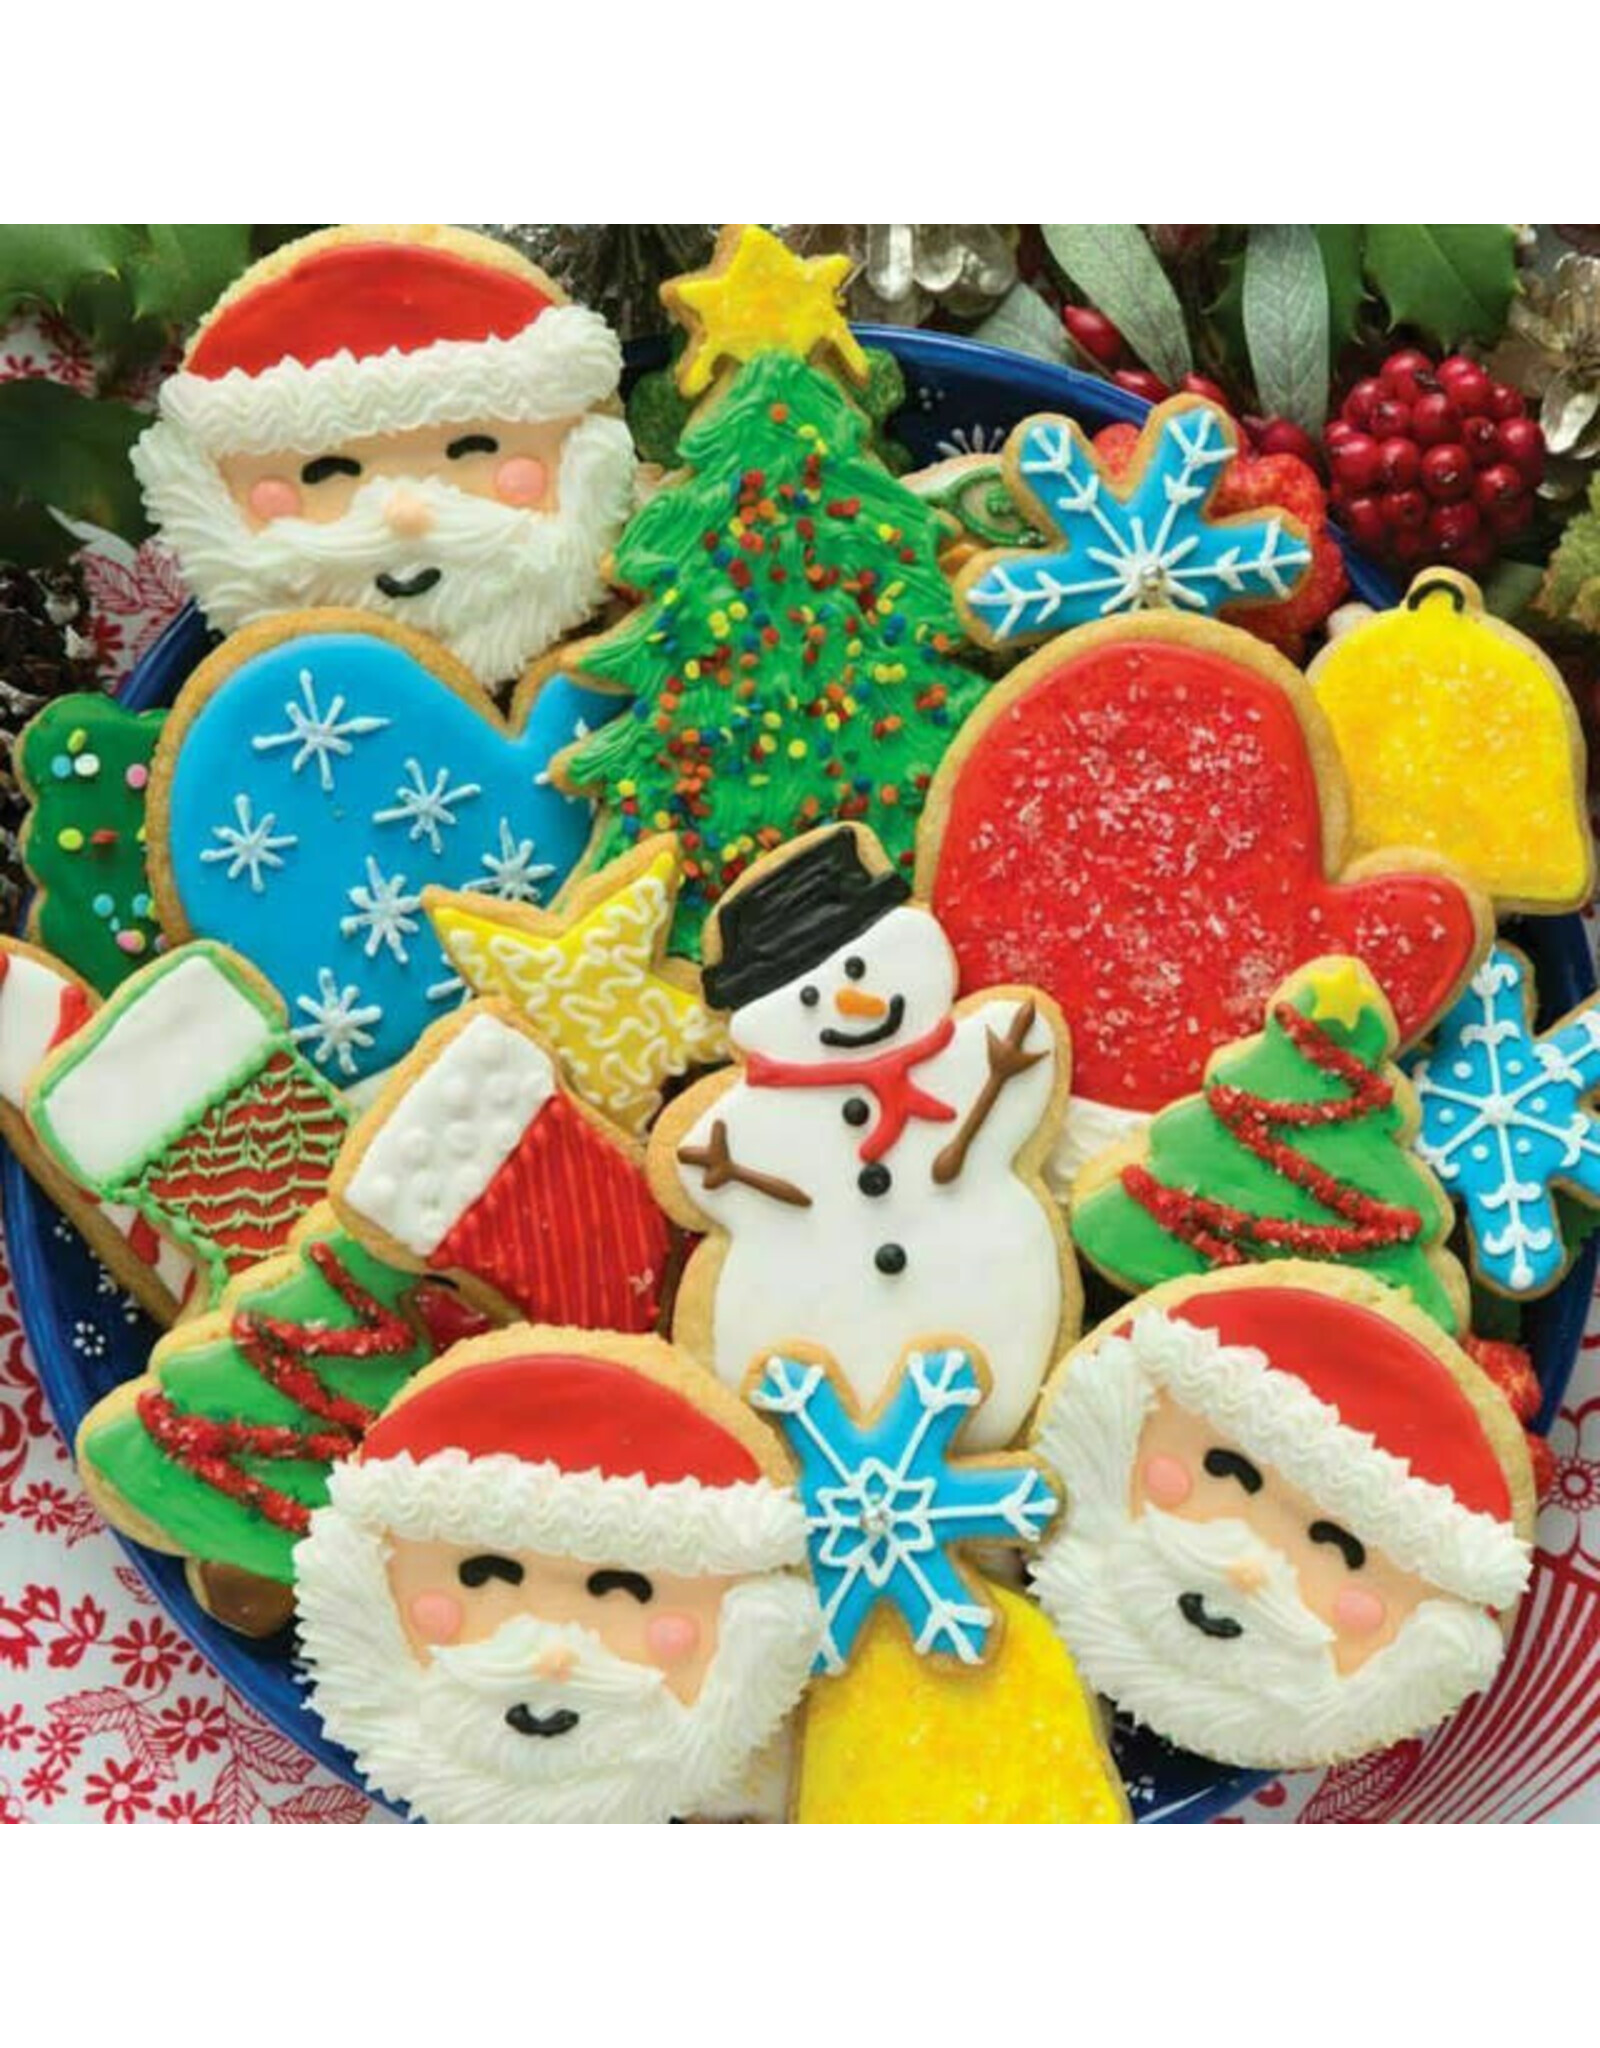 Cookies & Christmas 500 Piece Jigsaw Puzzle